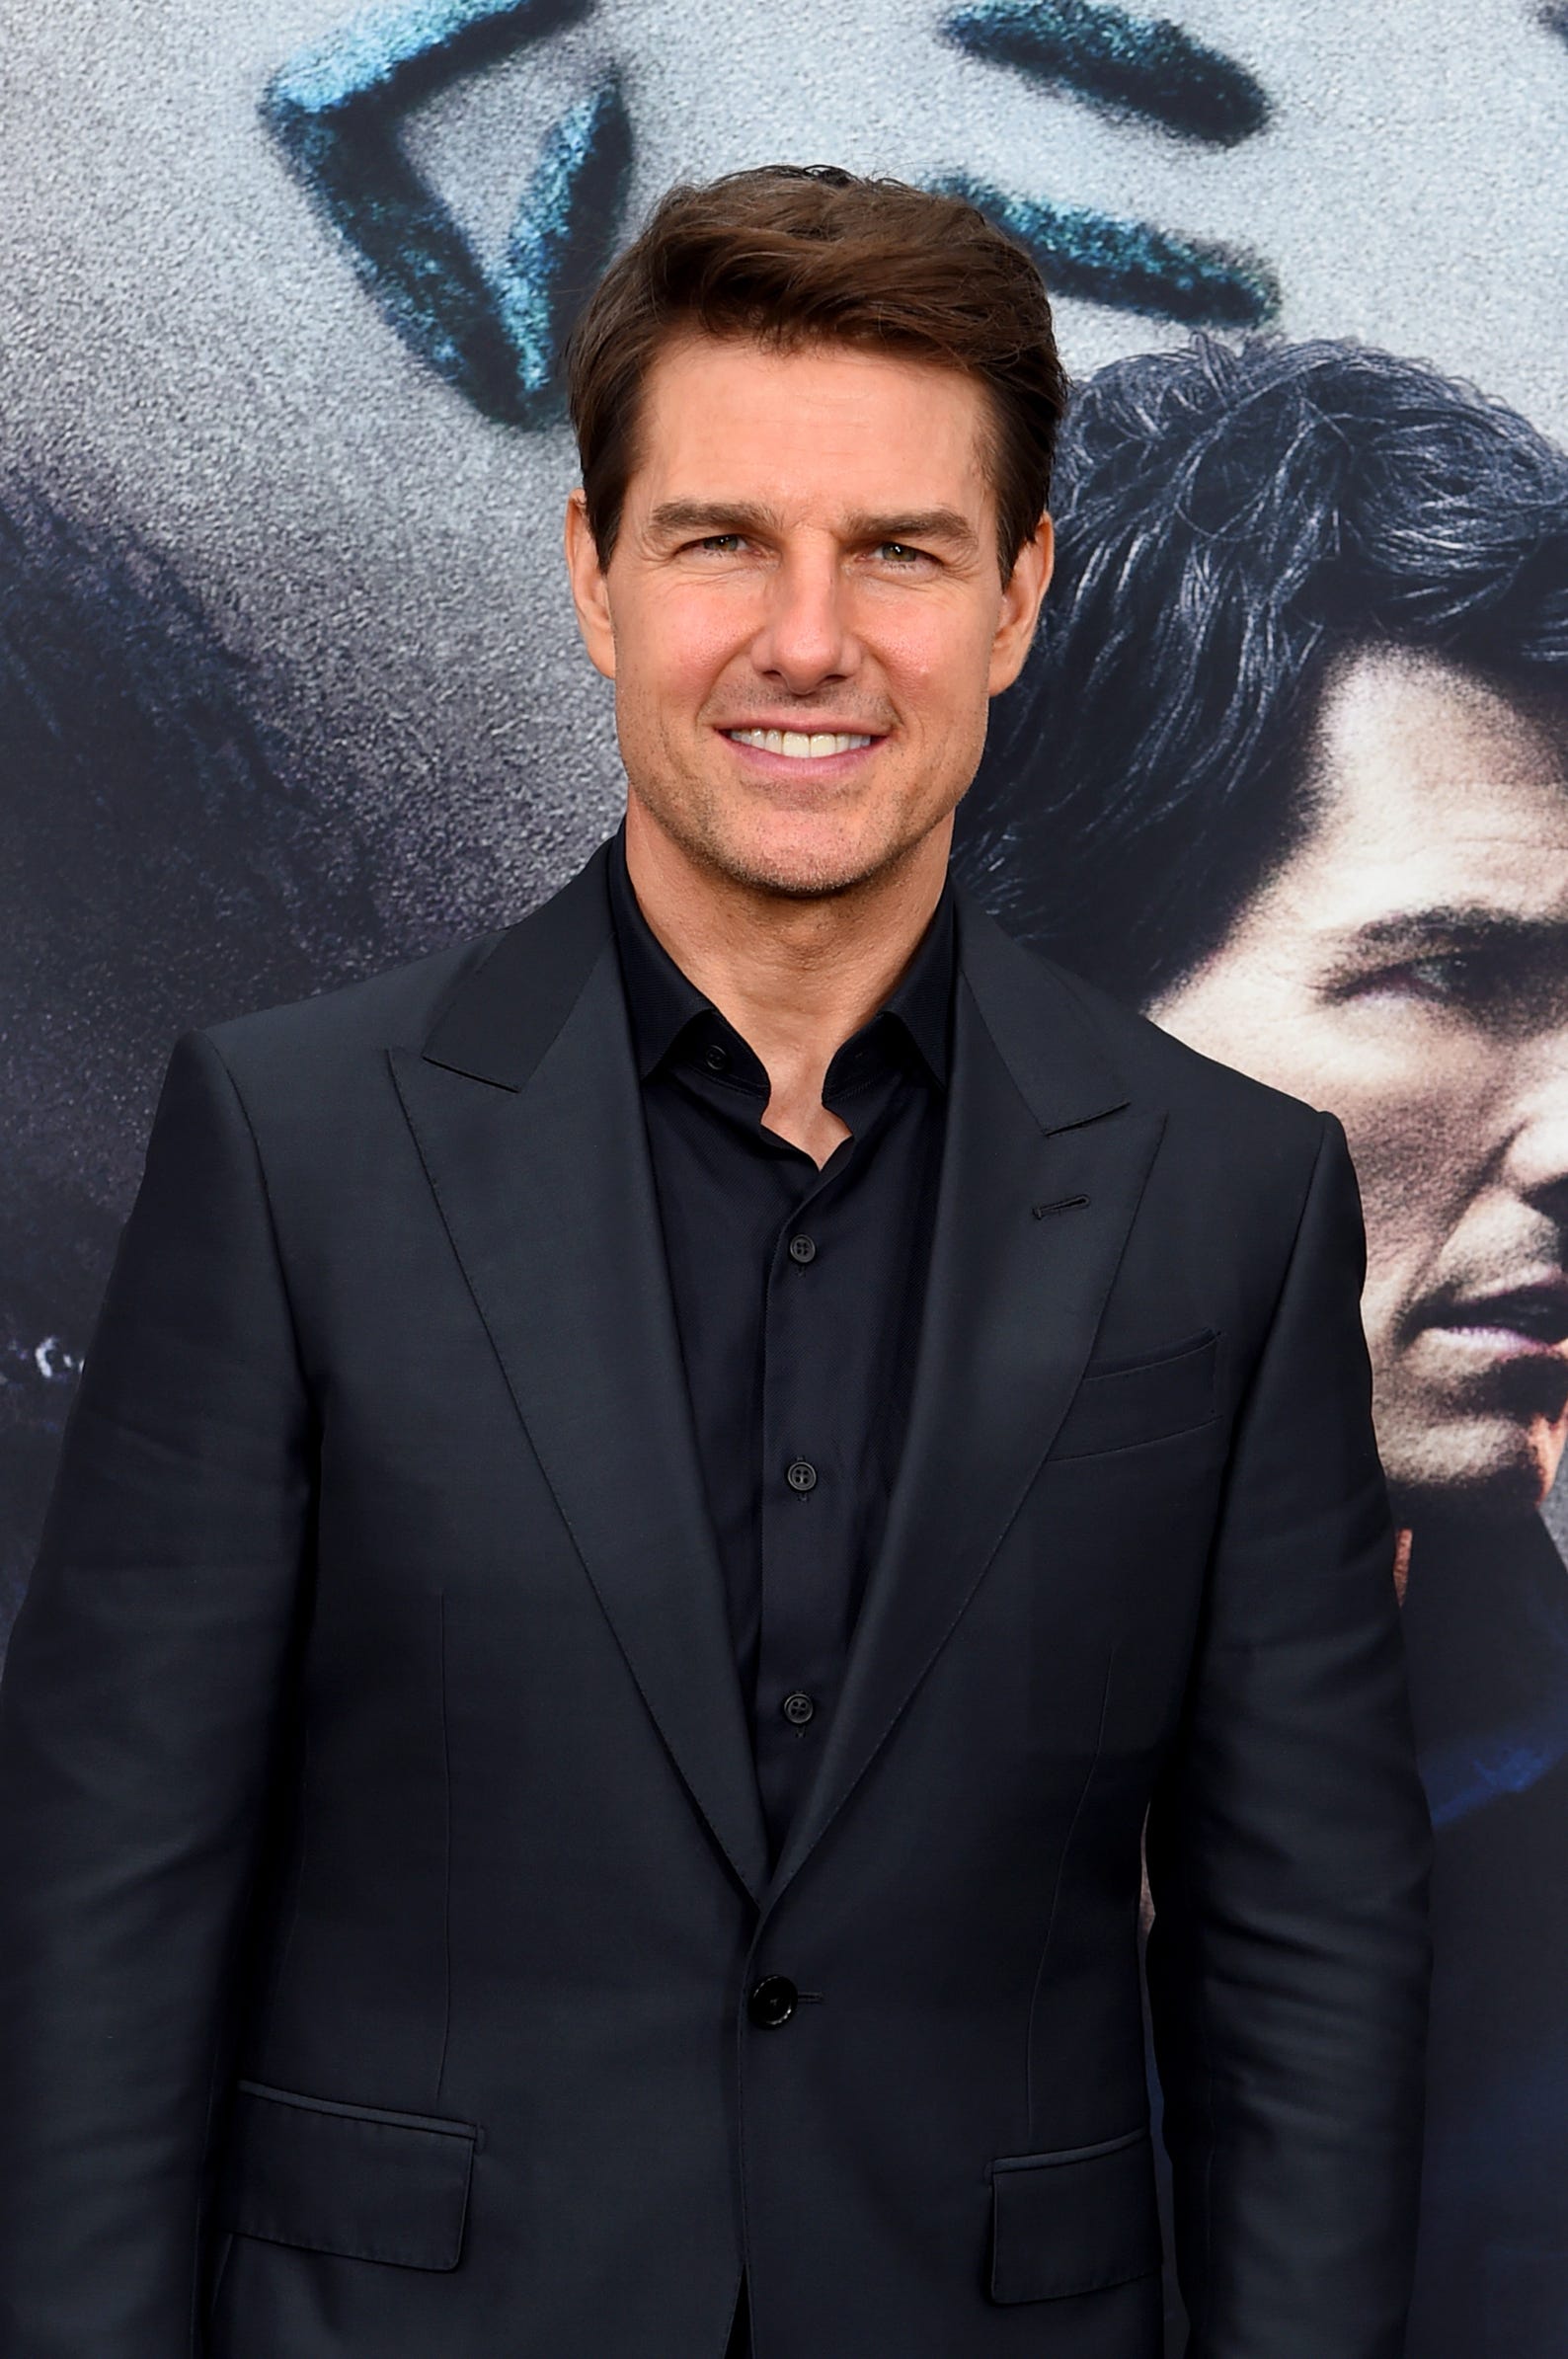 Detail Tom Cruise Pictures Nomer 25